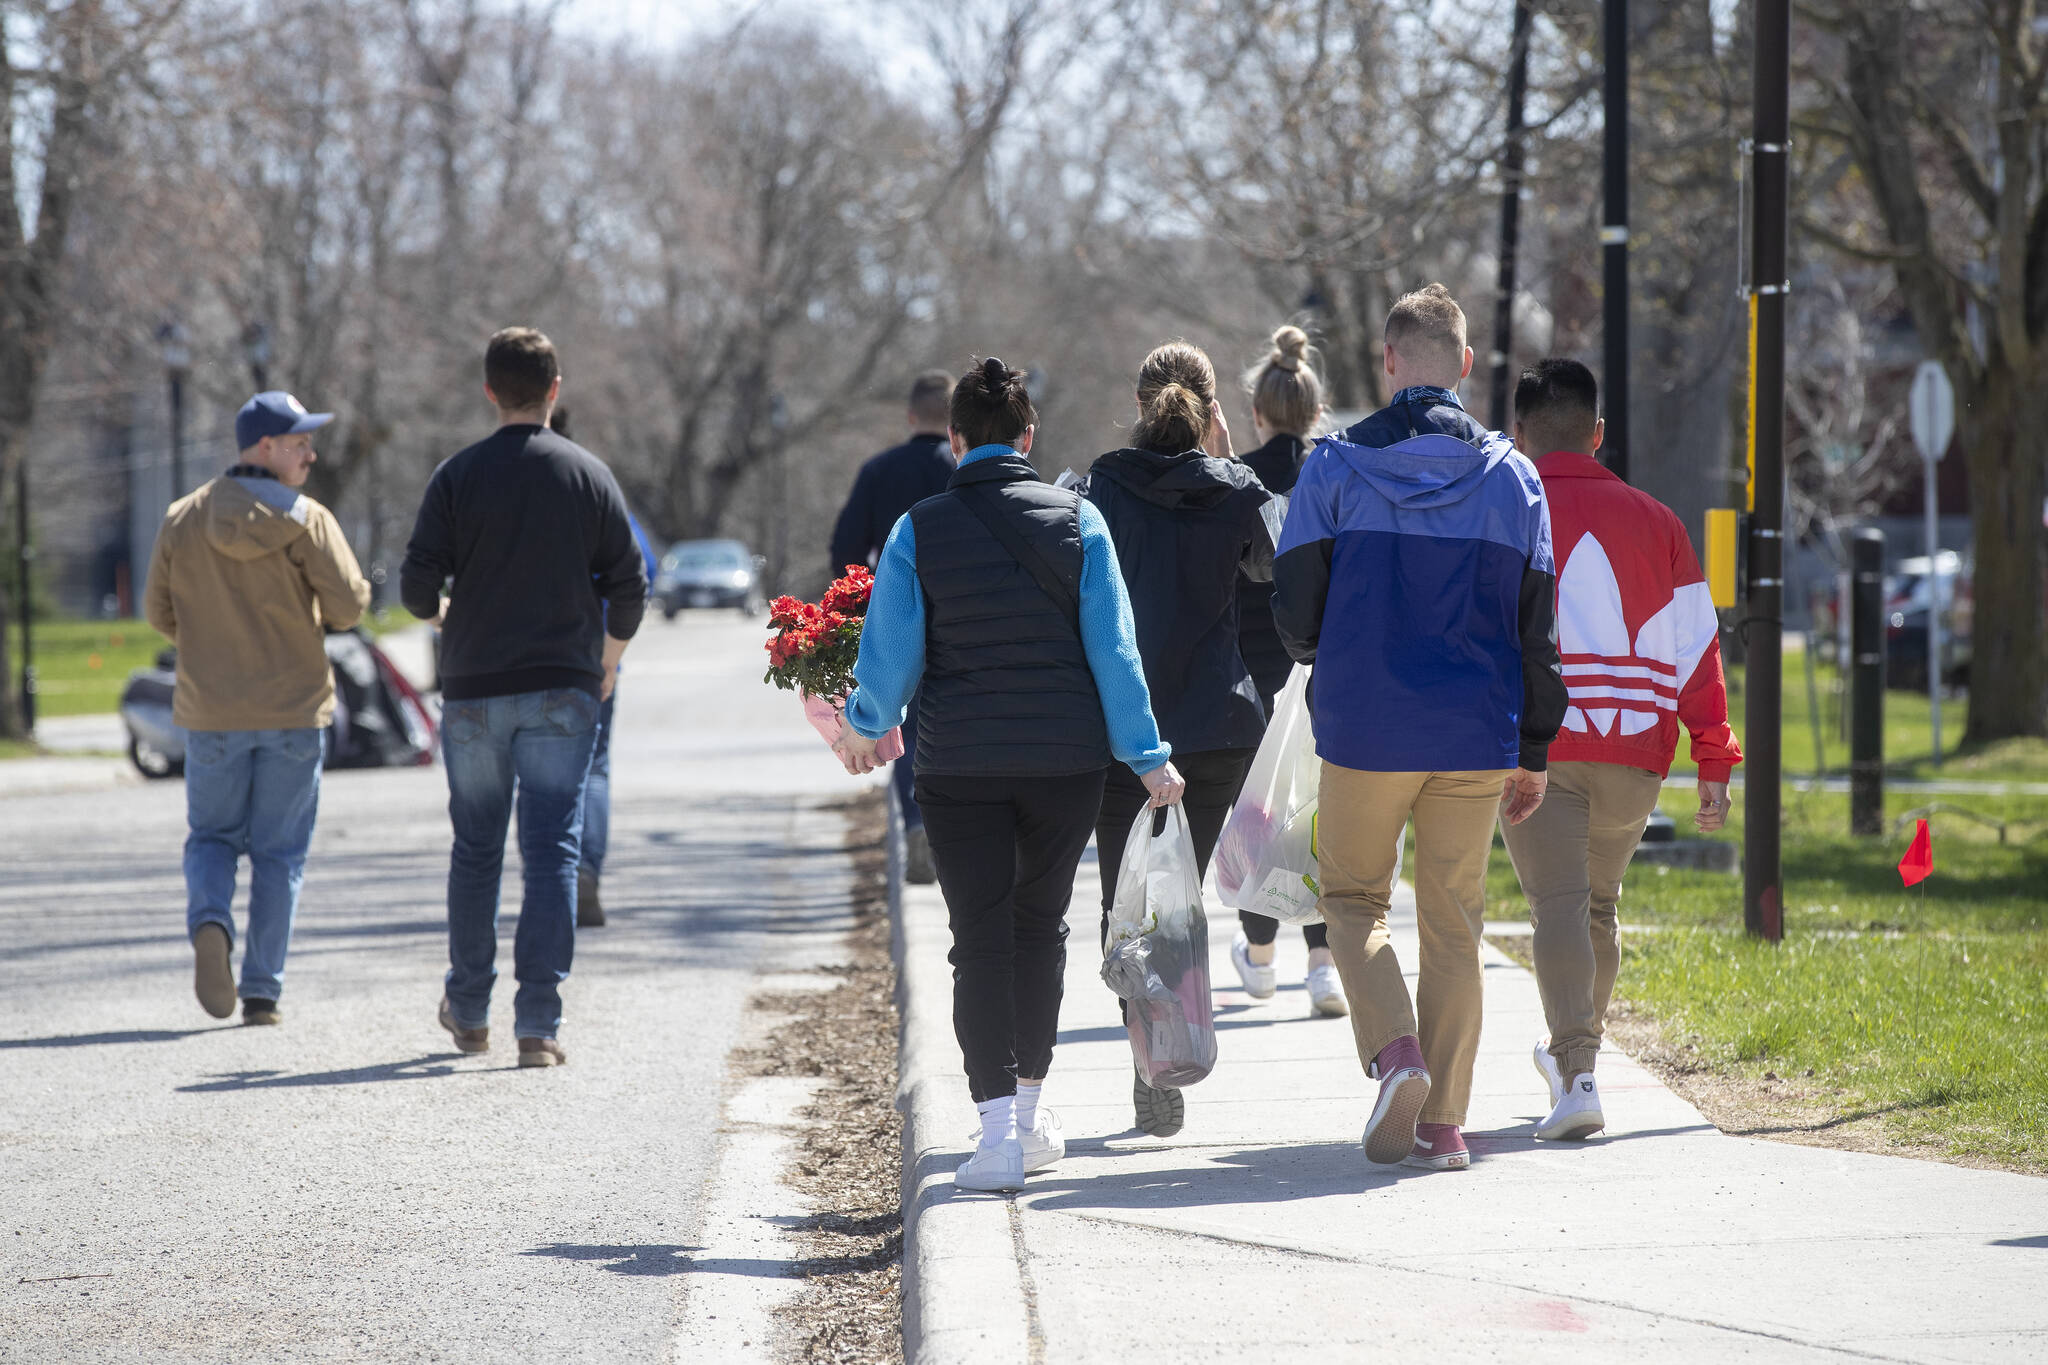 Cadets carry flowers at the Royal Military College in Kingston, Ontario on Friday April 29, 2022. The Department of National Defence says it’s investigating an incident involving a vehicle at the Royal Military College campus. THE CANADIAN PRESS/Lars Hagberg